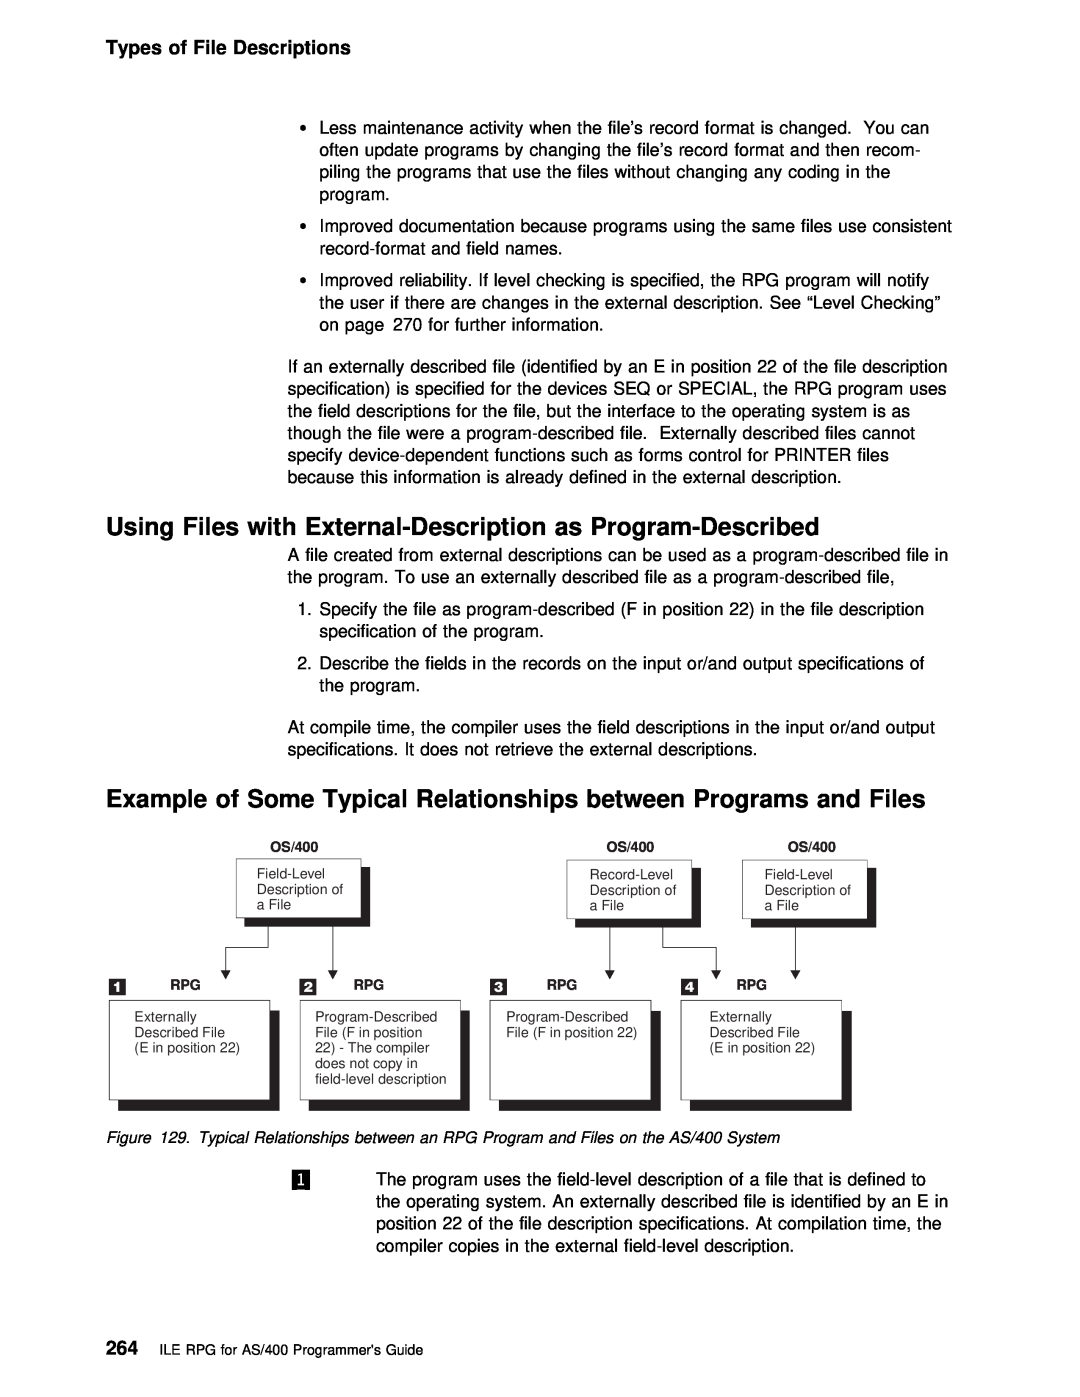 IBM AS/400 manual Using Files with, Program-Described, Example of Some Typical Relationships between, Programs and 